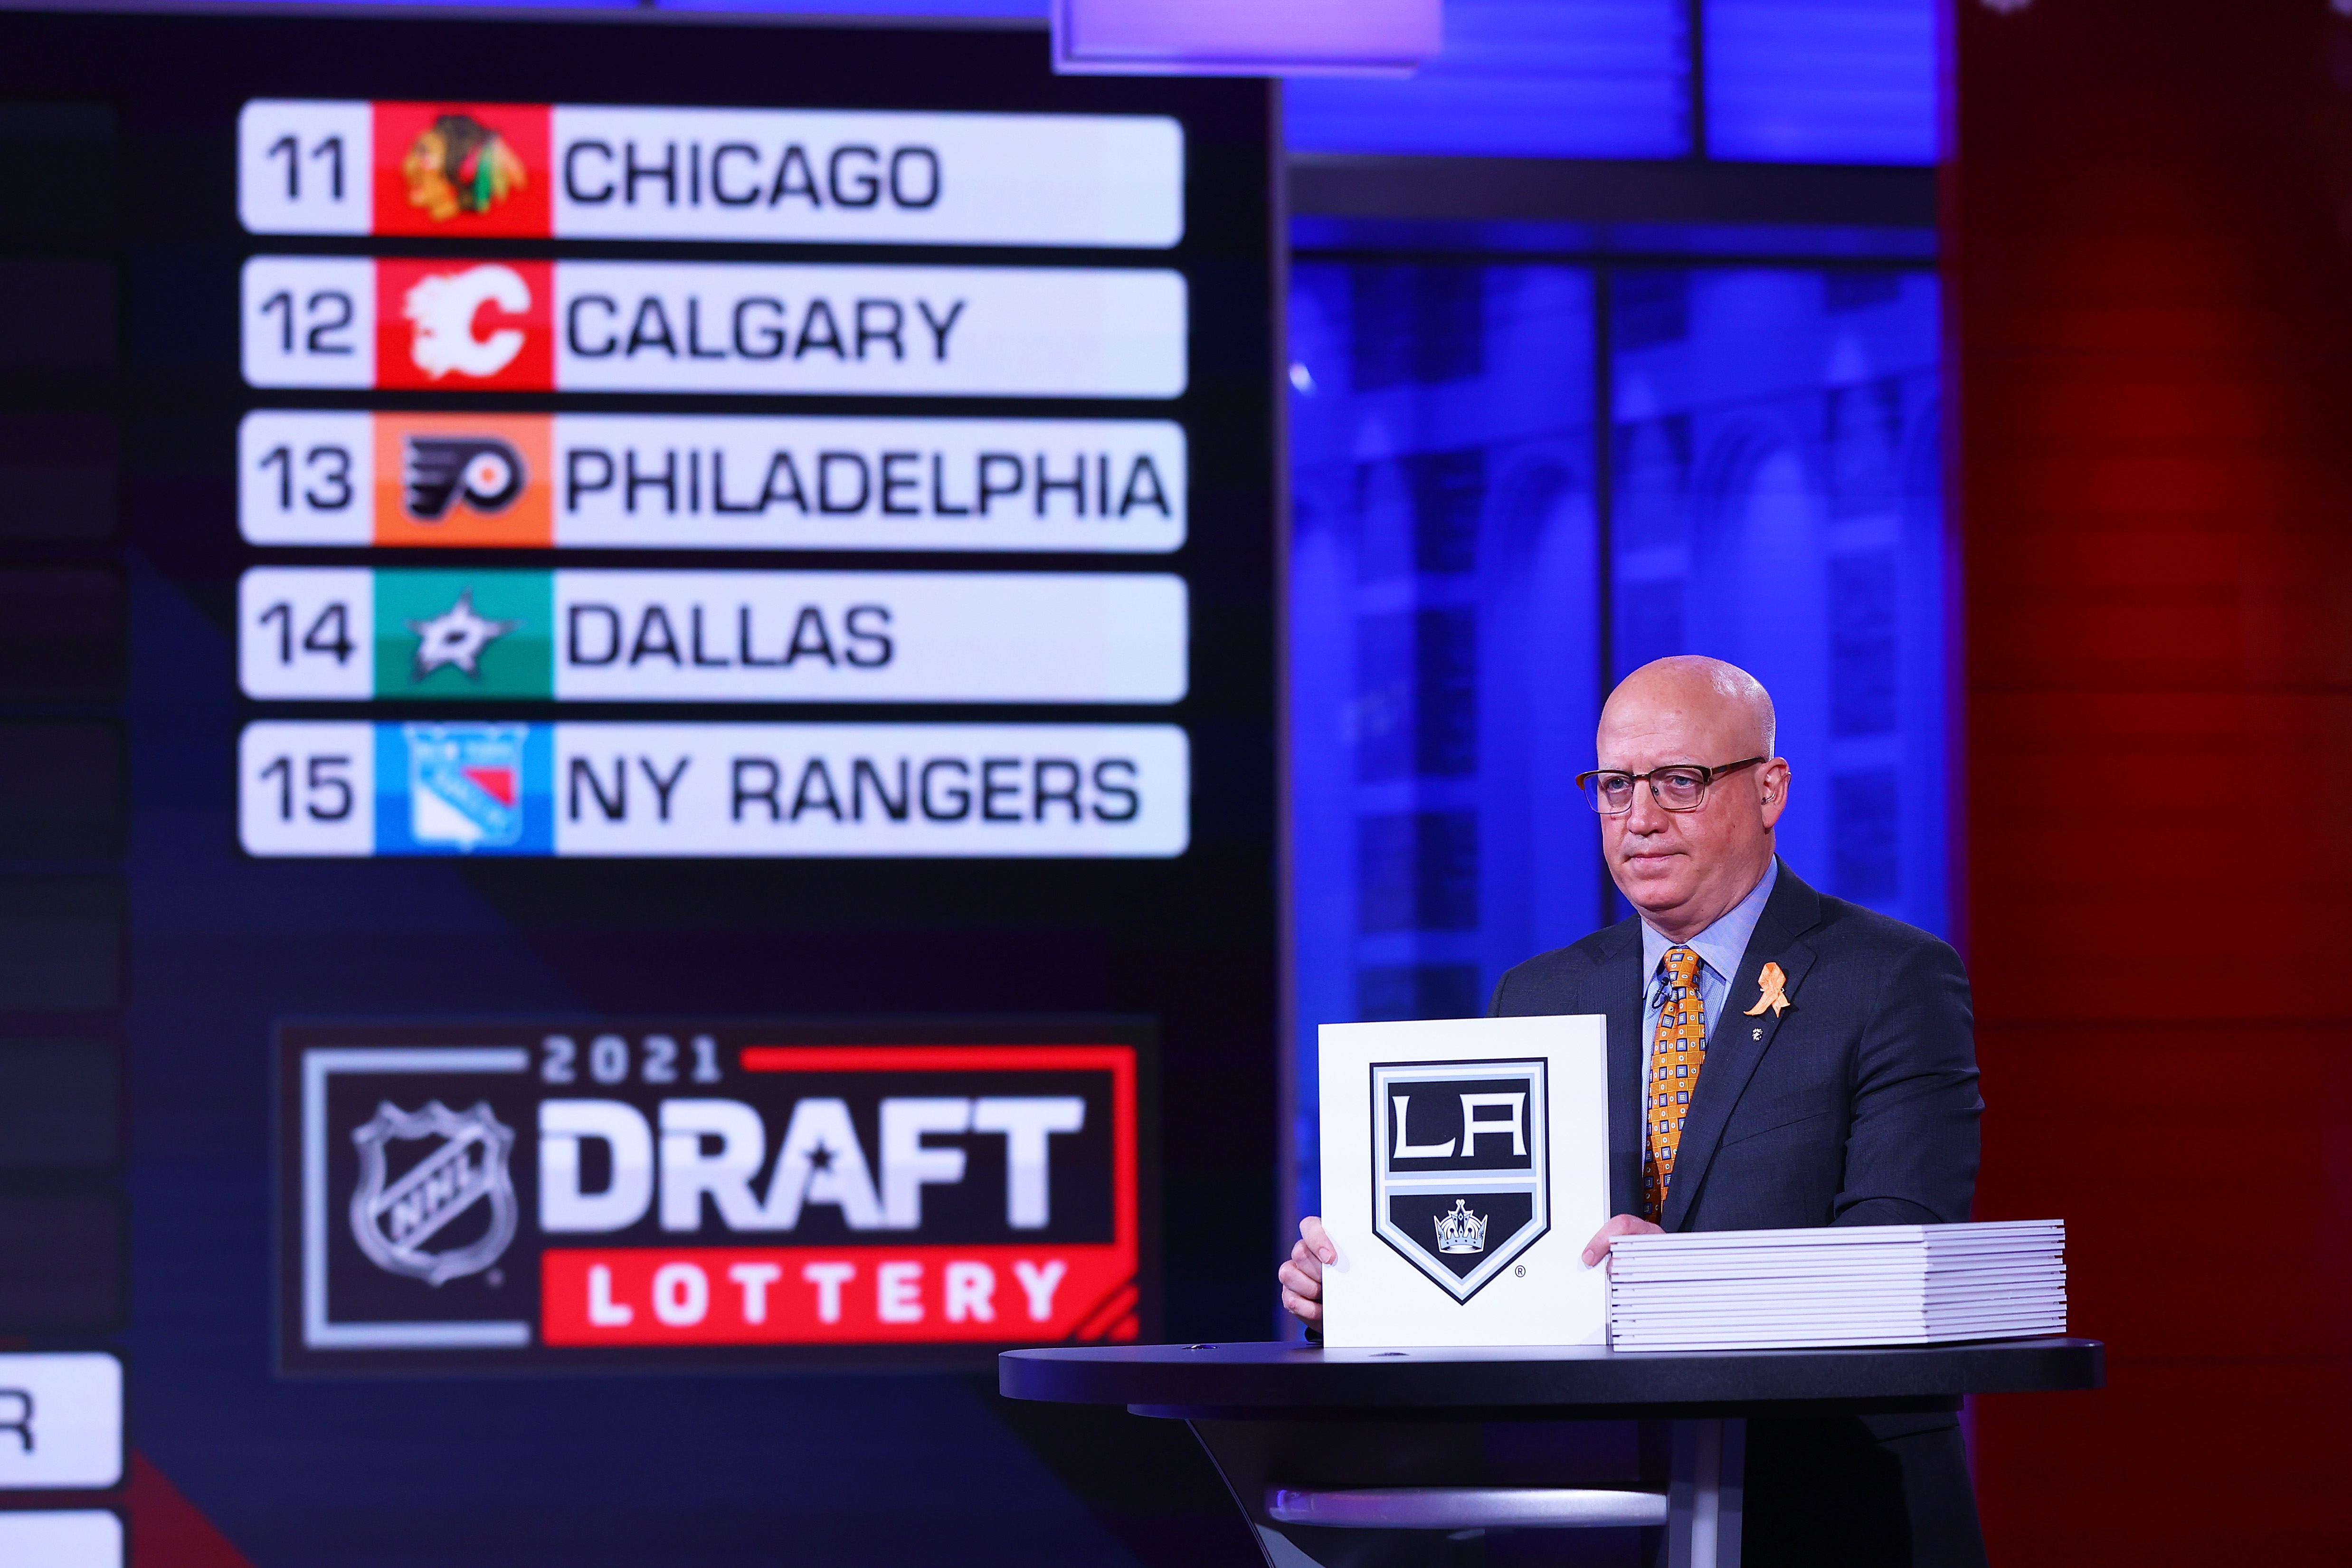 National Hockey League Deputy Commissioner Bill Daly announces an Los Angeles Kings draft position during the 2021 NHL Draft Lottery on June 02, 2021 at the NHL Network’s studio in Secaucus, New Jersey.